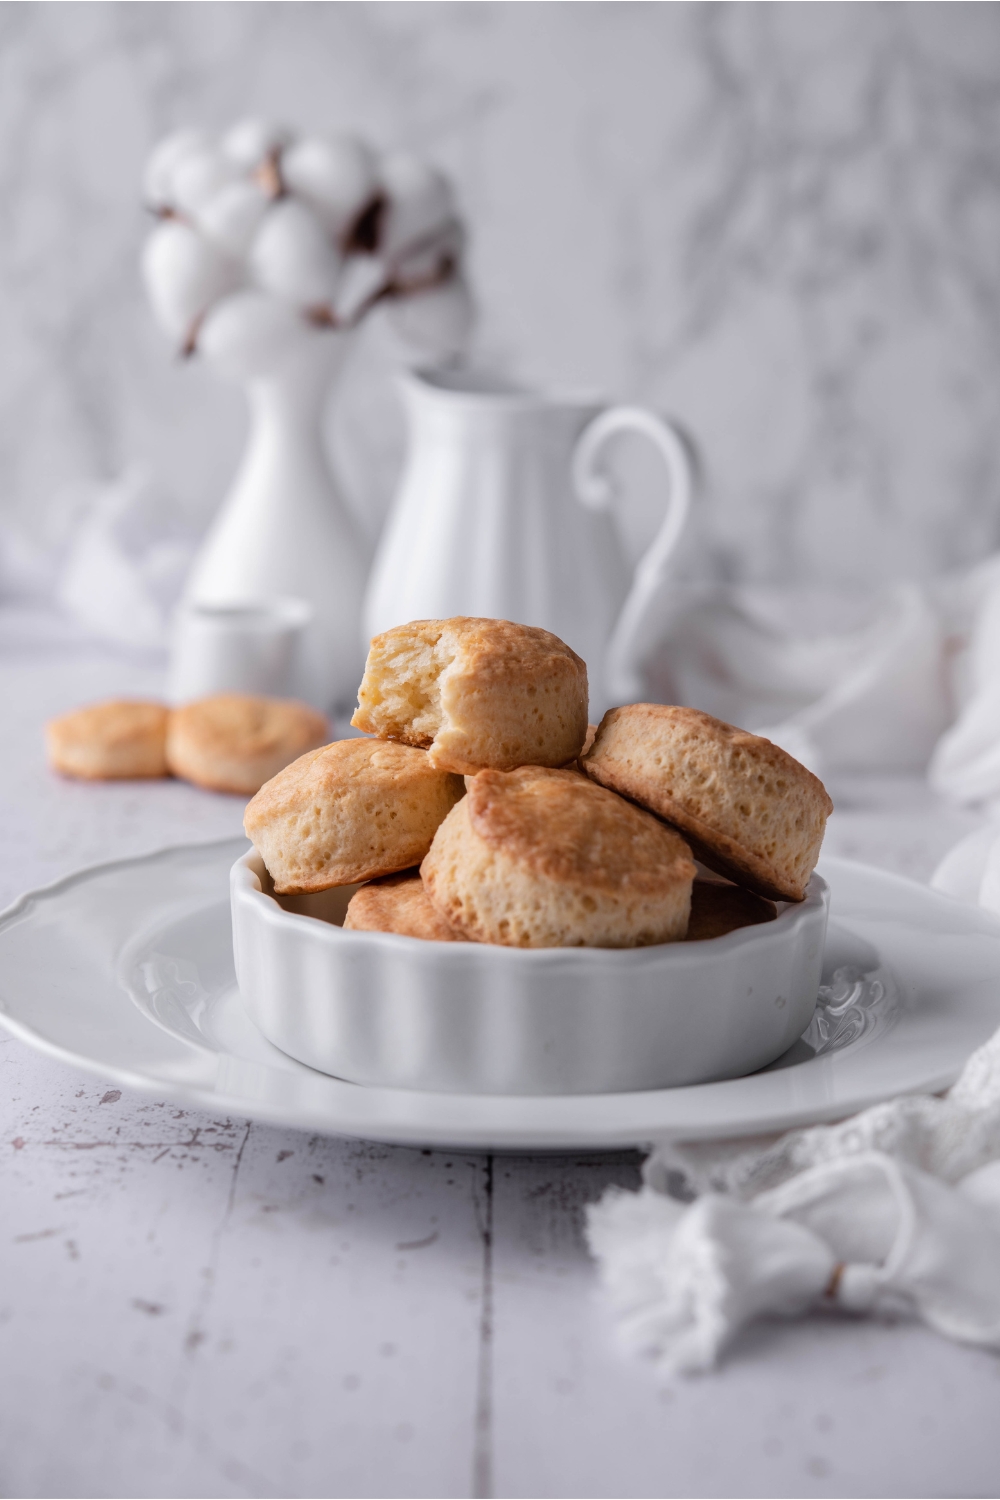 A white dish atop a white serving tray with a pile of Popeye's biscuits in the dish. There's a bite taken out of one of the biscuits on top of the pile.